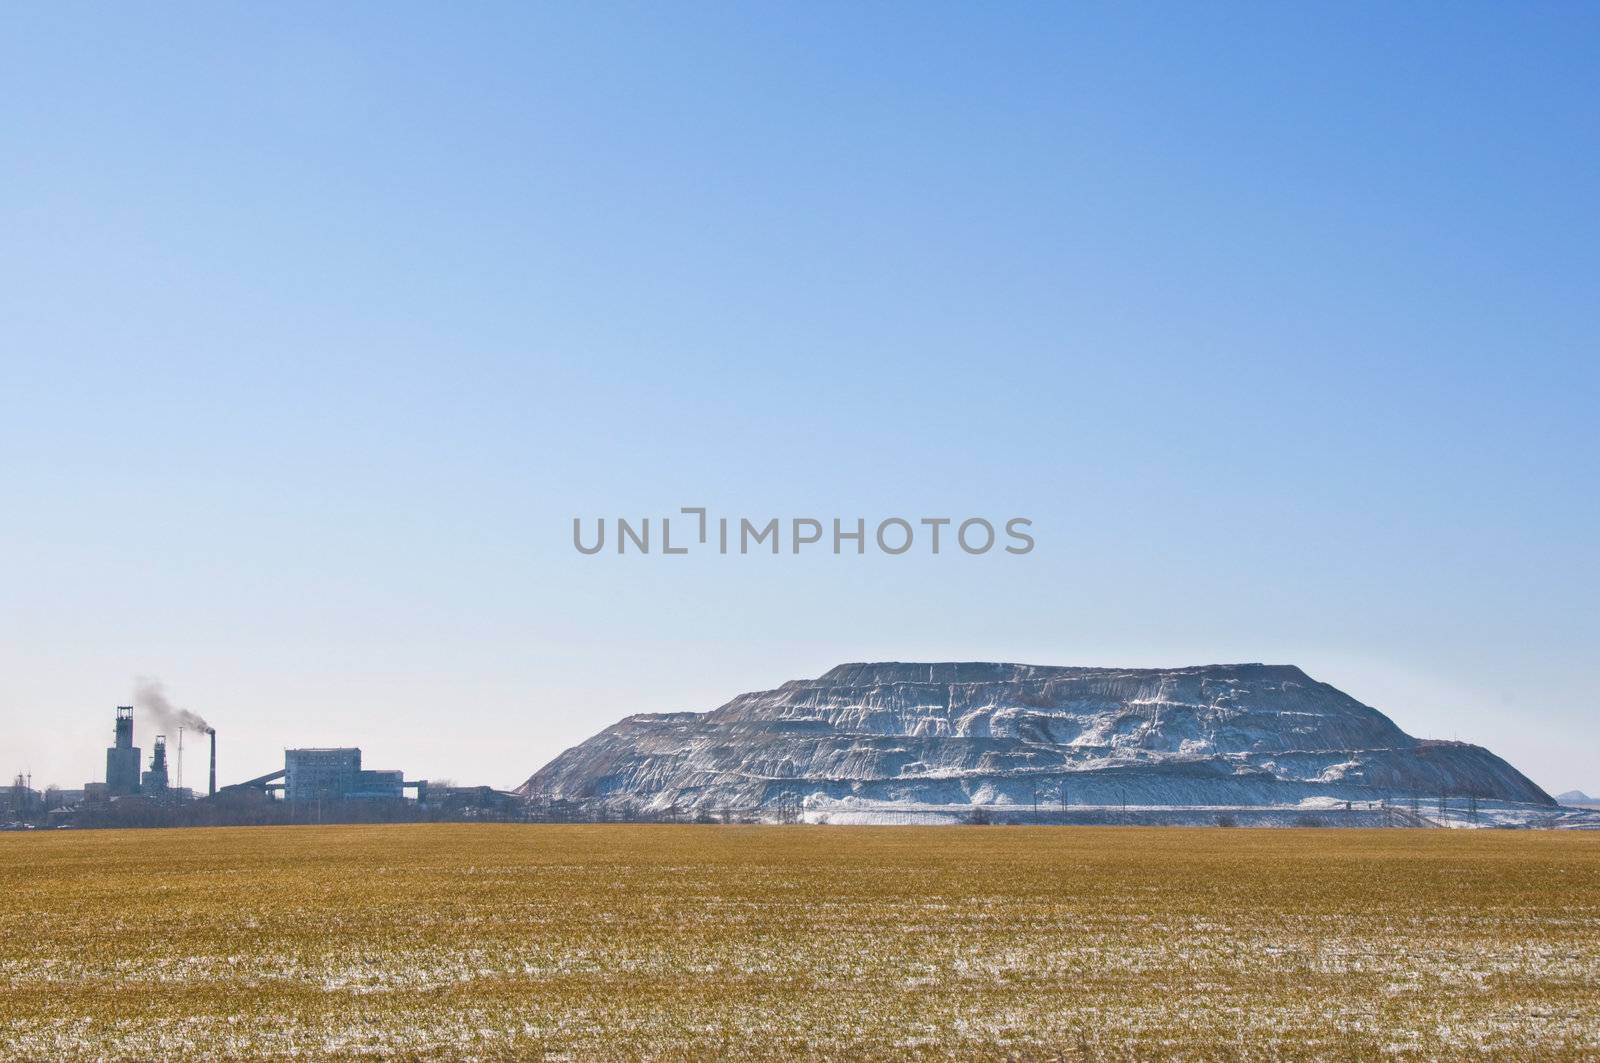 Artificial man-made rock near coal mine in Ukraine with winter field on foreground